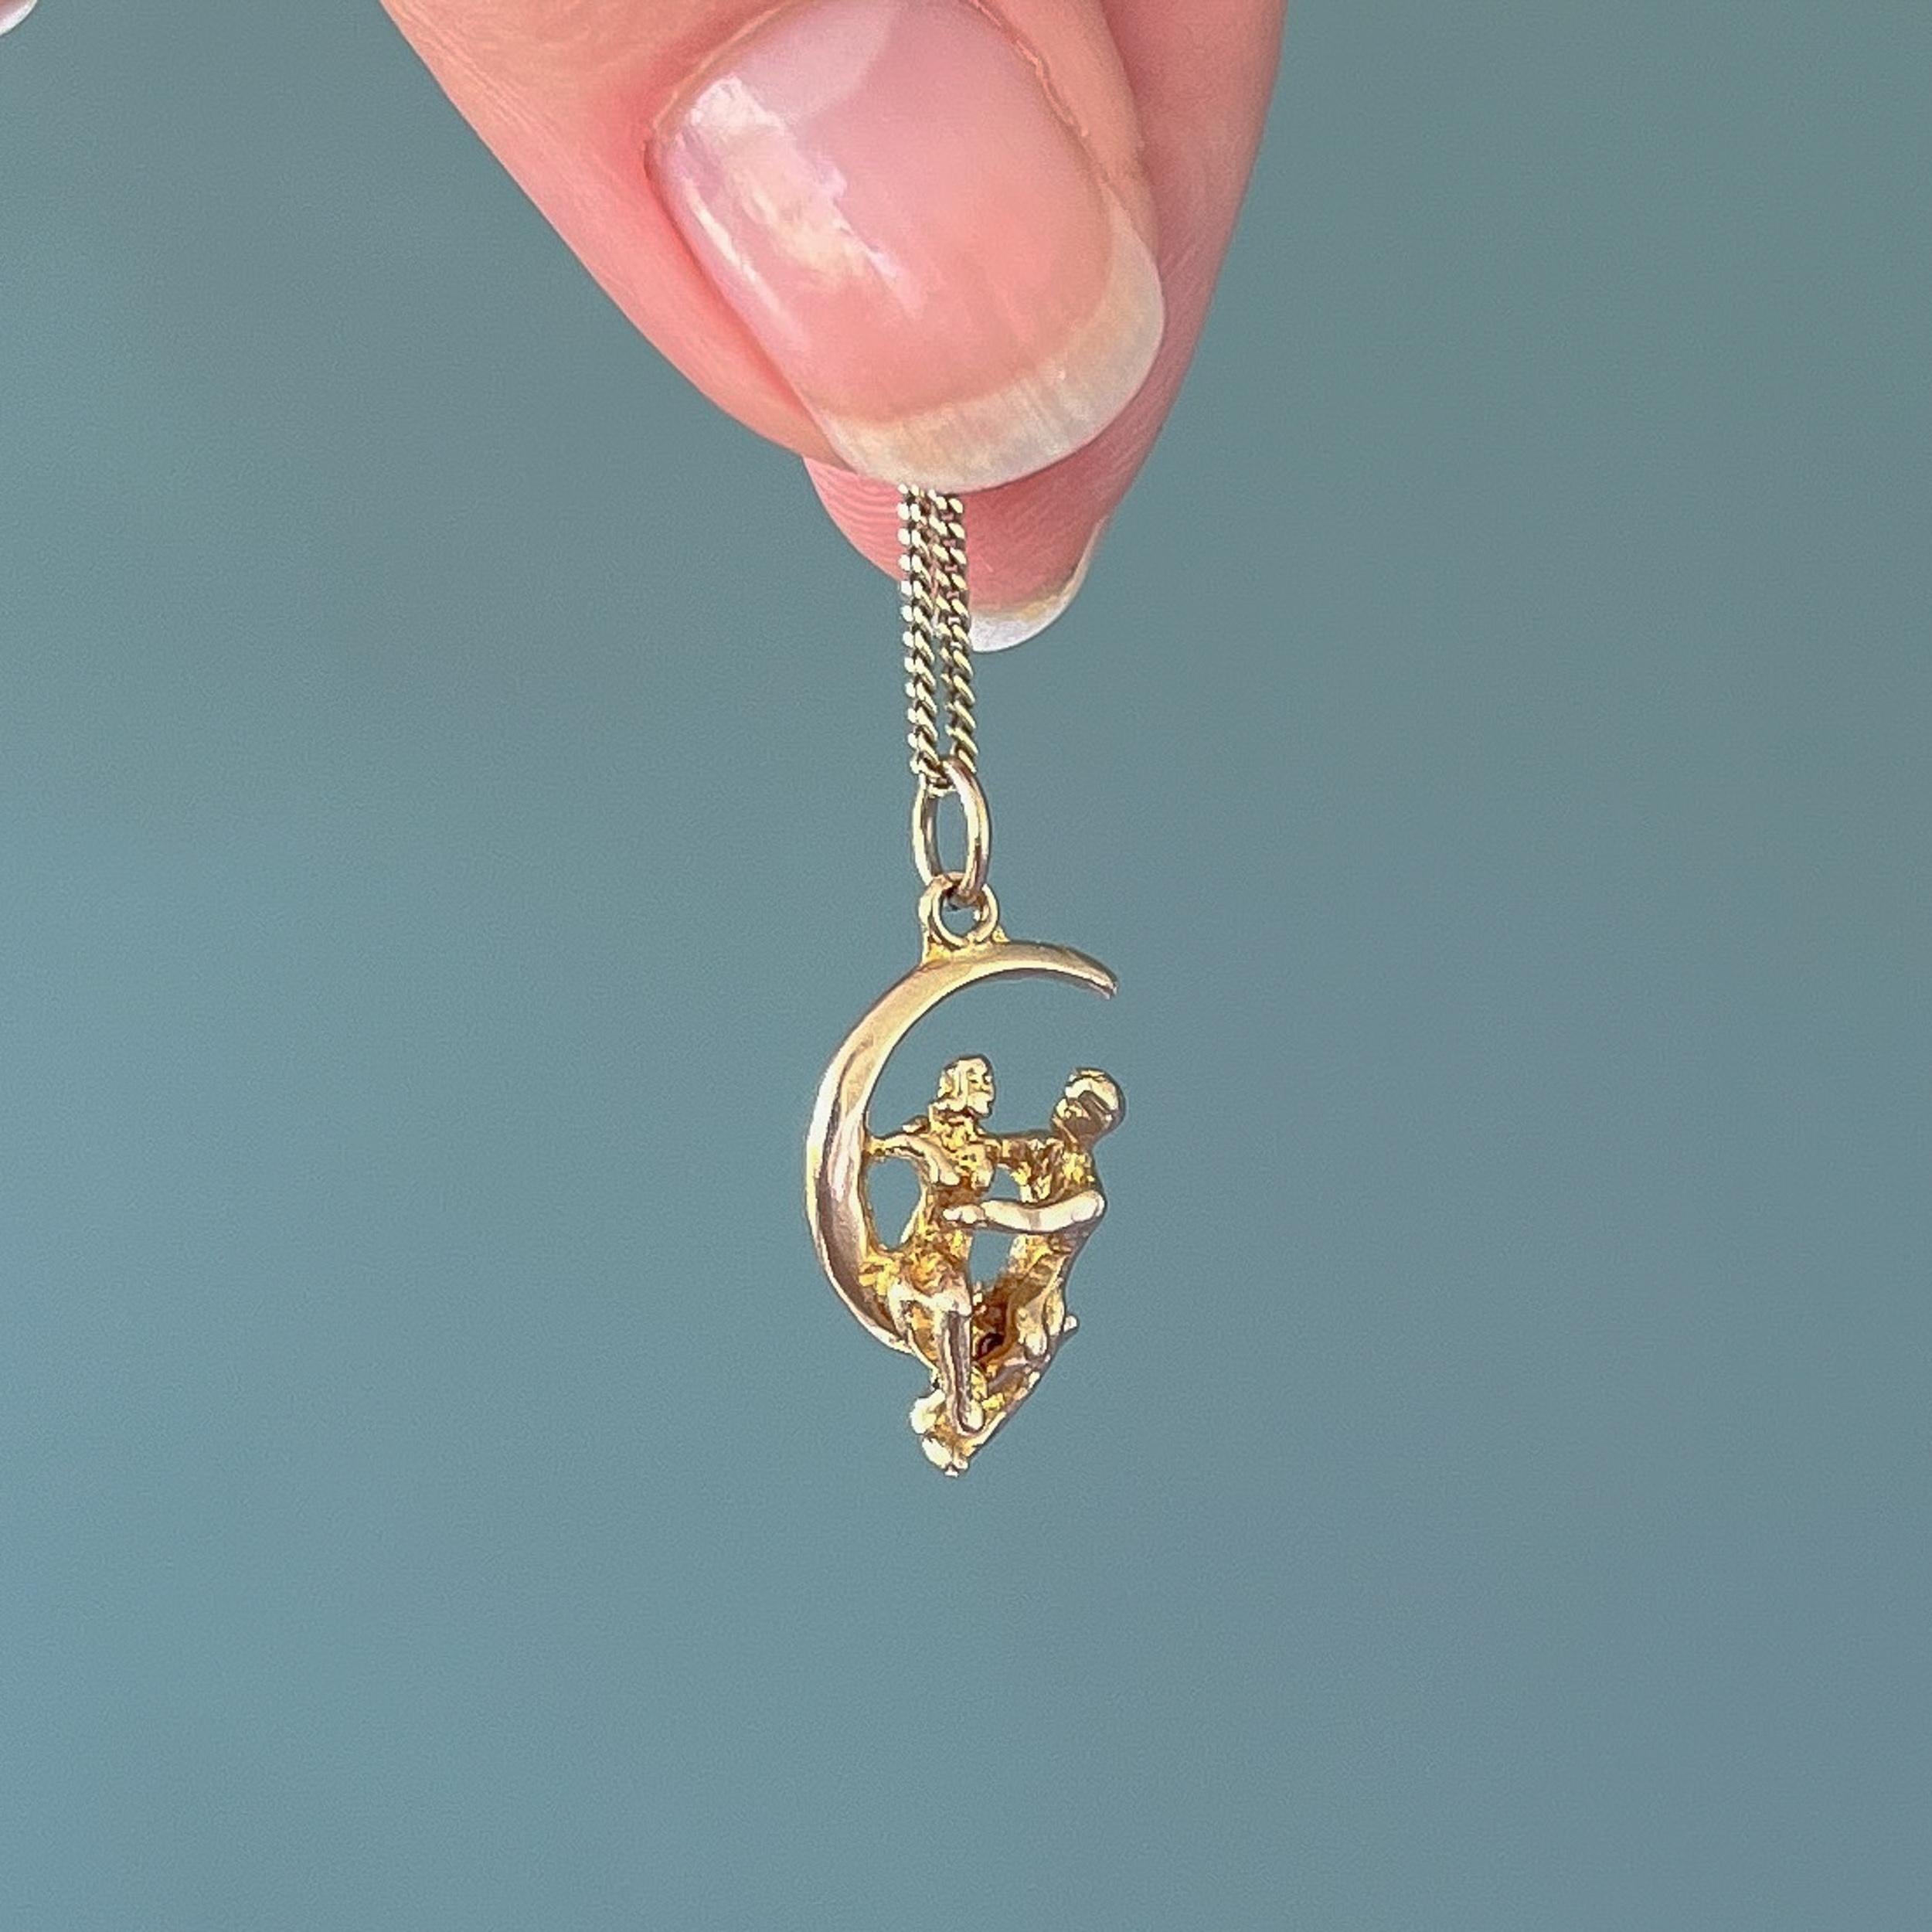 This is a vintage 9 karat yellow gold loving couple on a crescent moon charm pendant. This charm is quite rare with this lovely love couple sitting on a this crescent moon, romantically in love with each other. The charm is movable, the man can lean